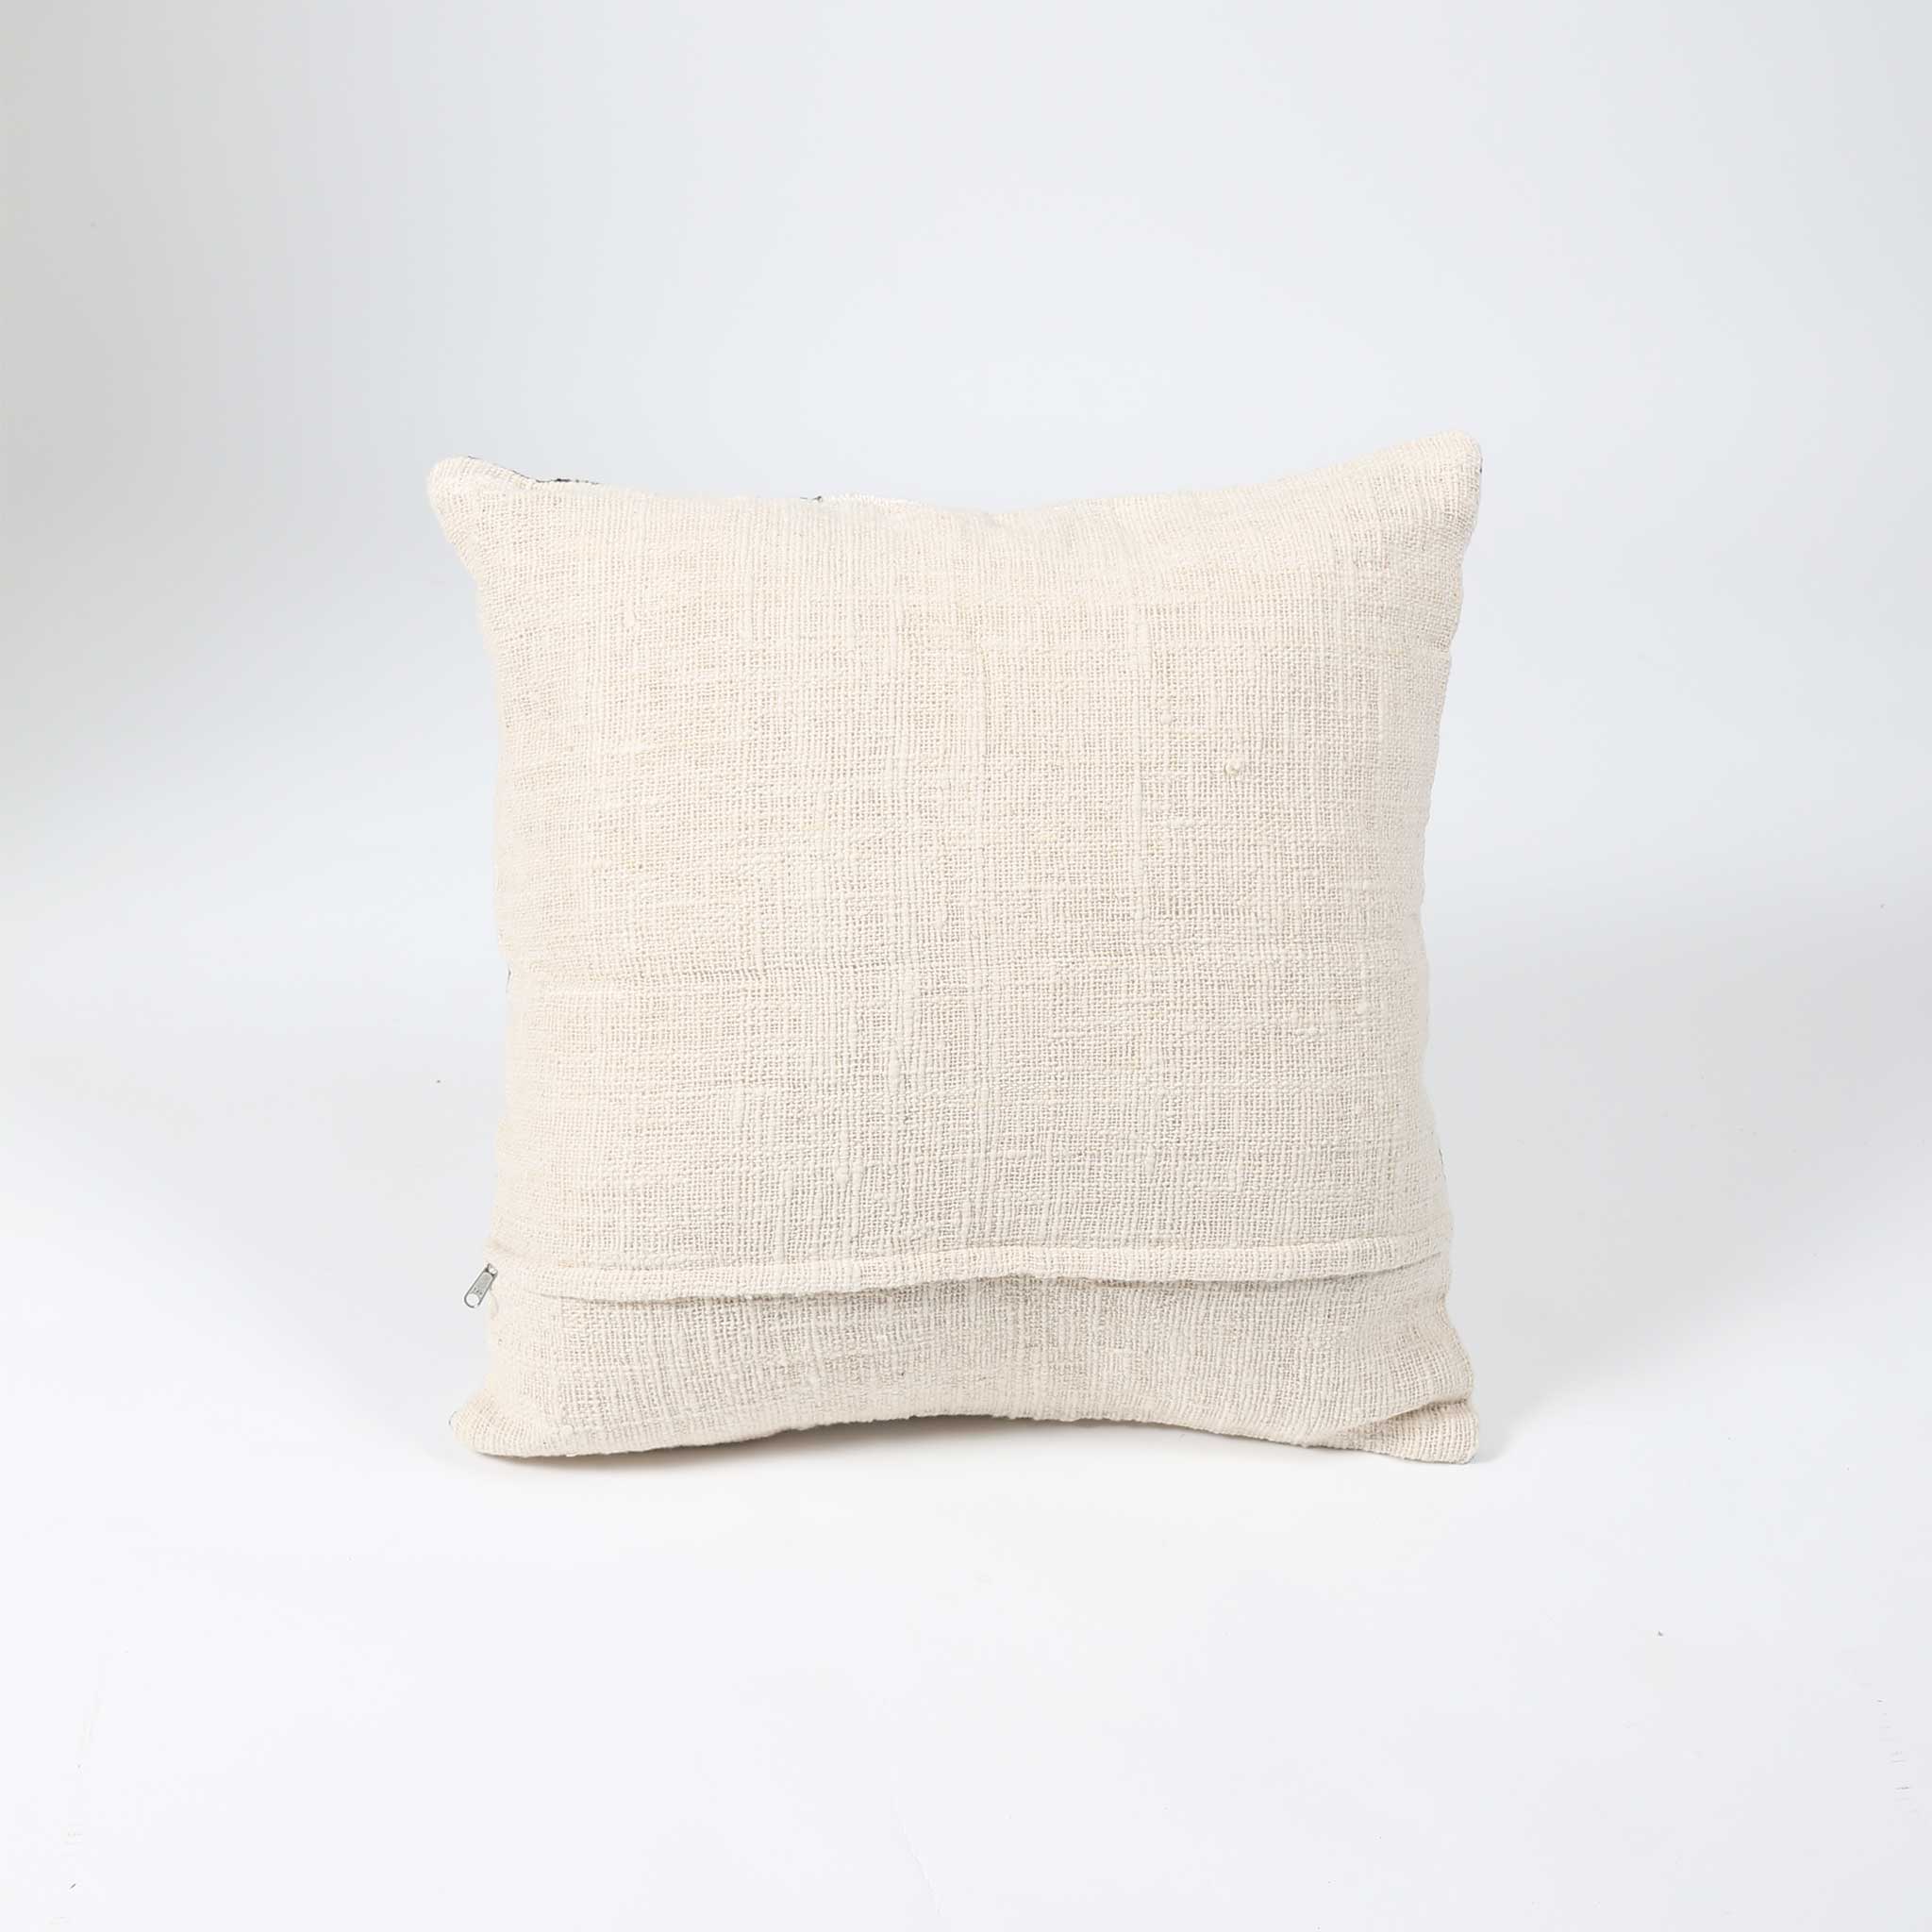 Black and Natural Patterned Cotton Cushion Cover